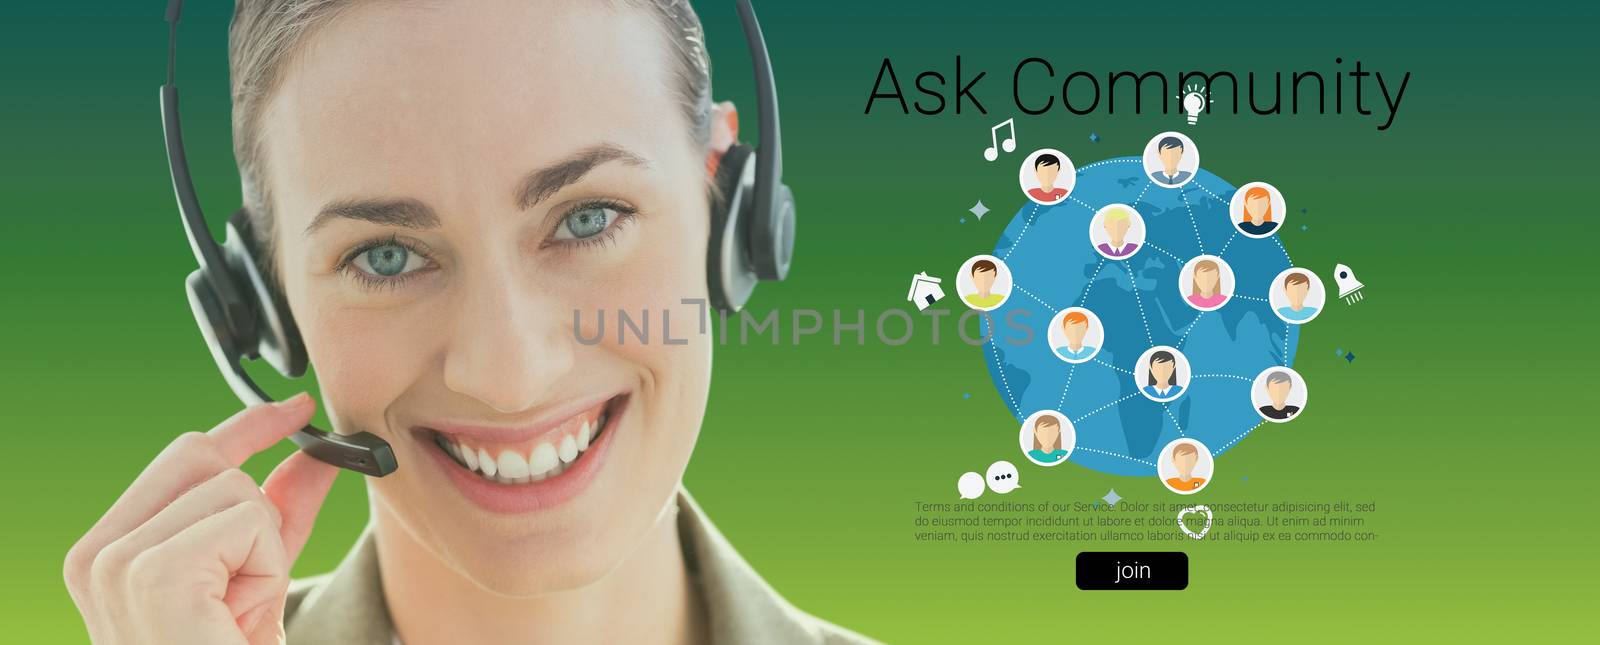 Smiling businesswoman with headset looking at camera  against green abstract background